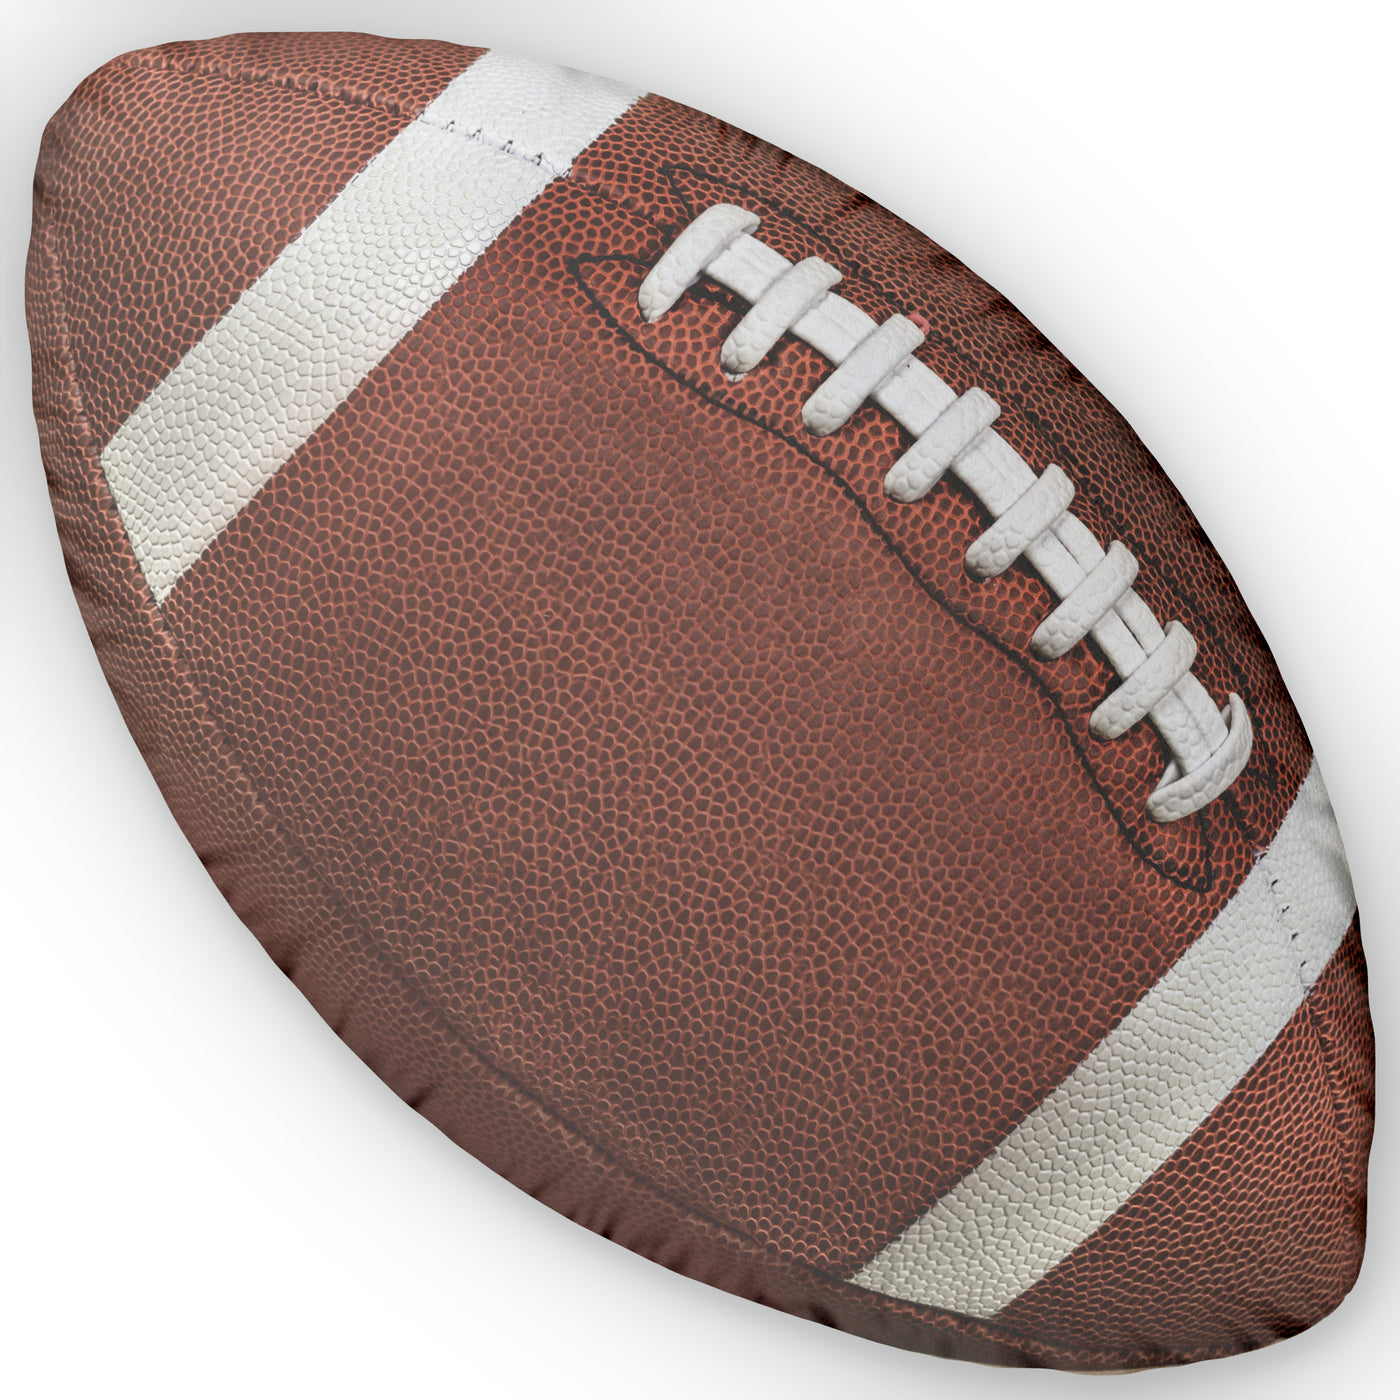 TOUCHDOWN FOOTBALL OVAL Custom Shaped Pillows - Up to 30 inches